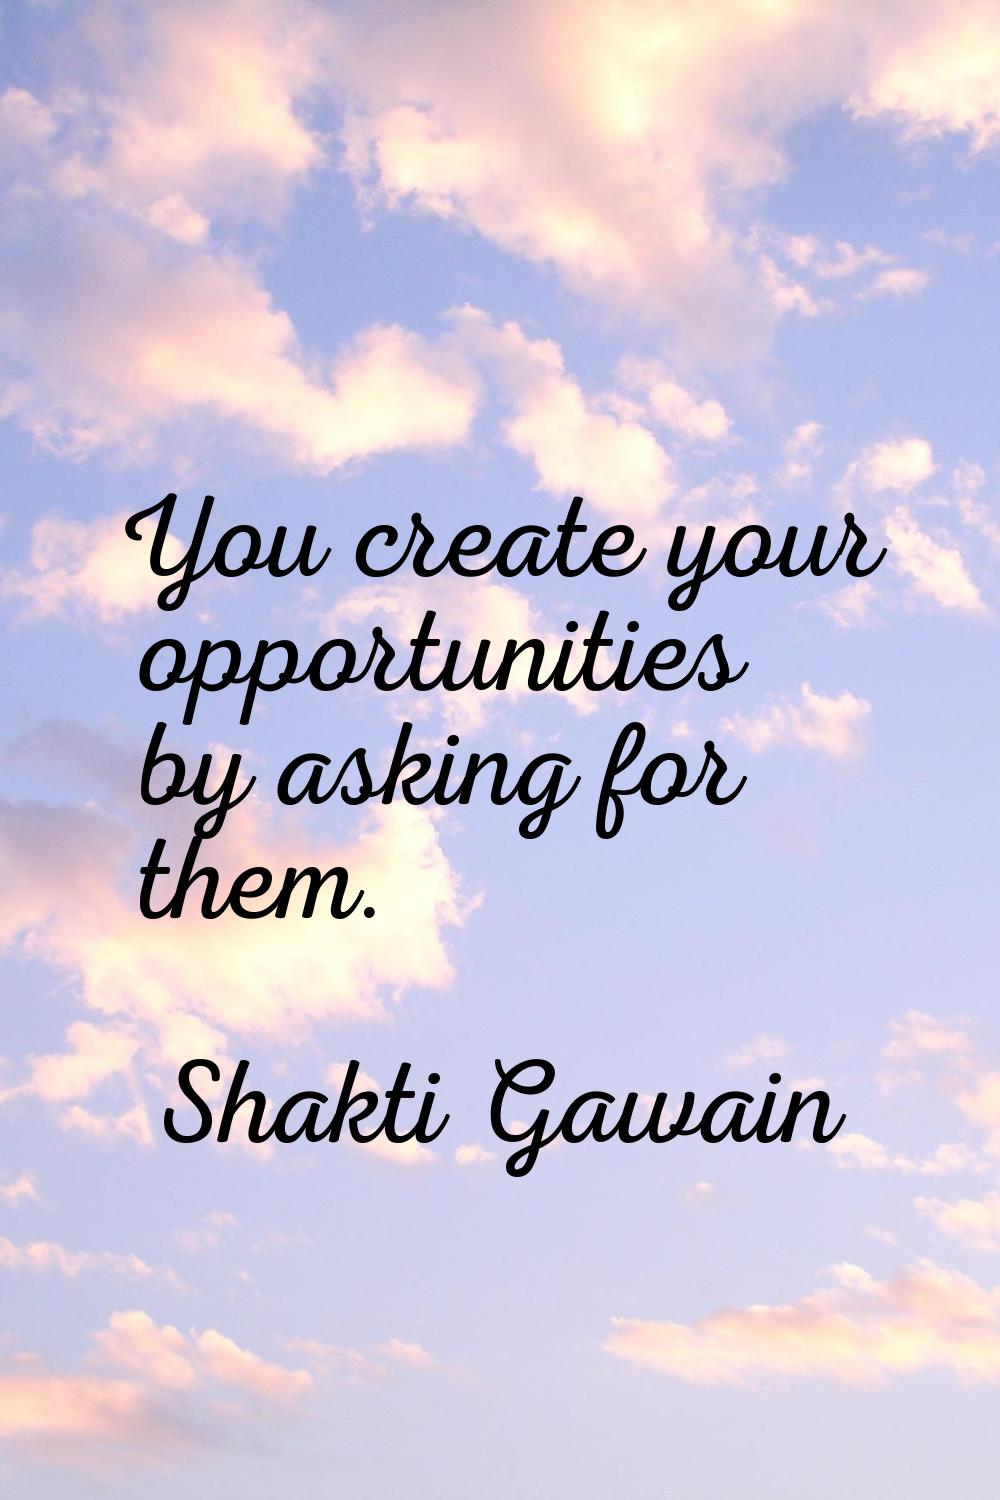 You create your opportunities by asking for them.